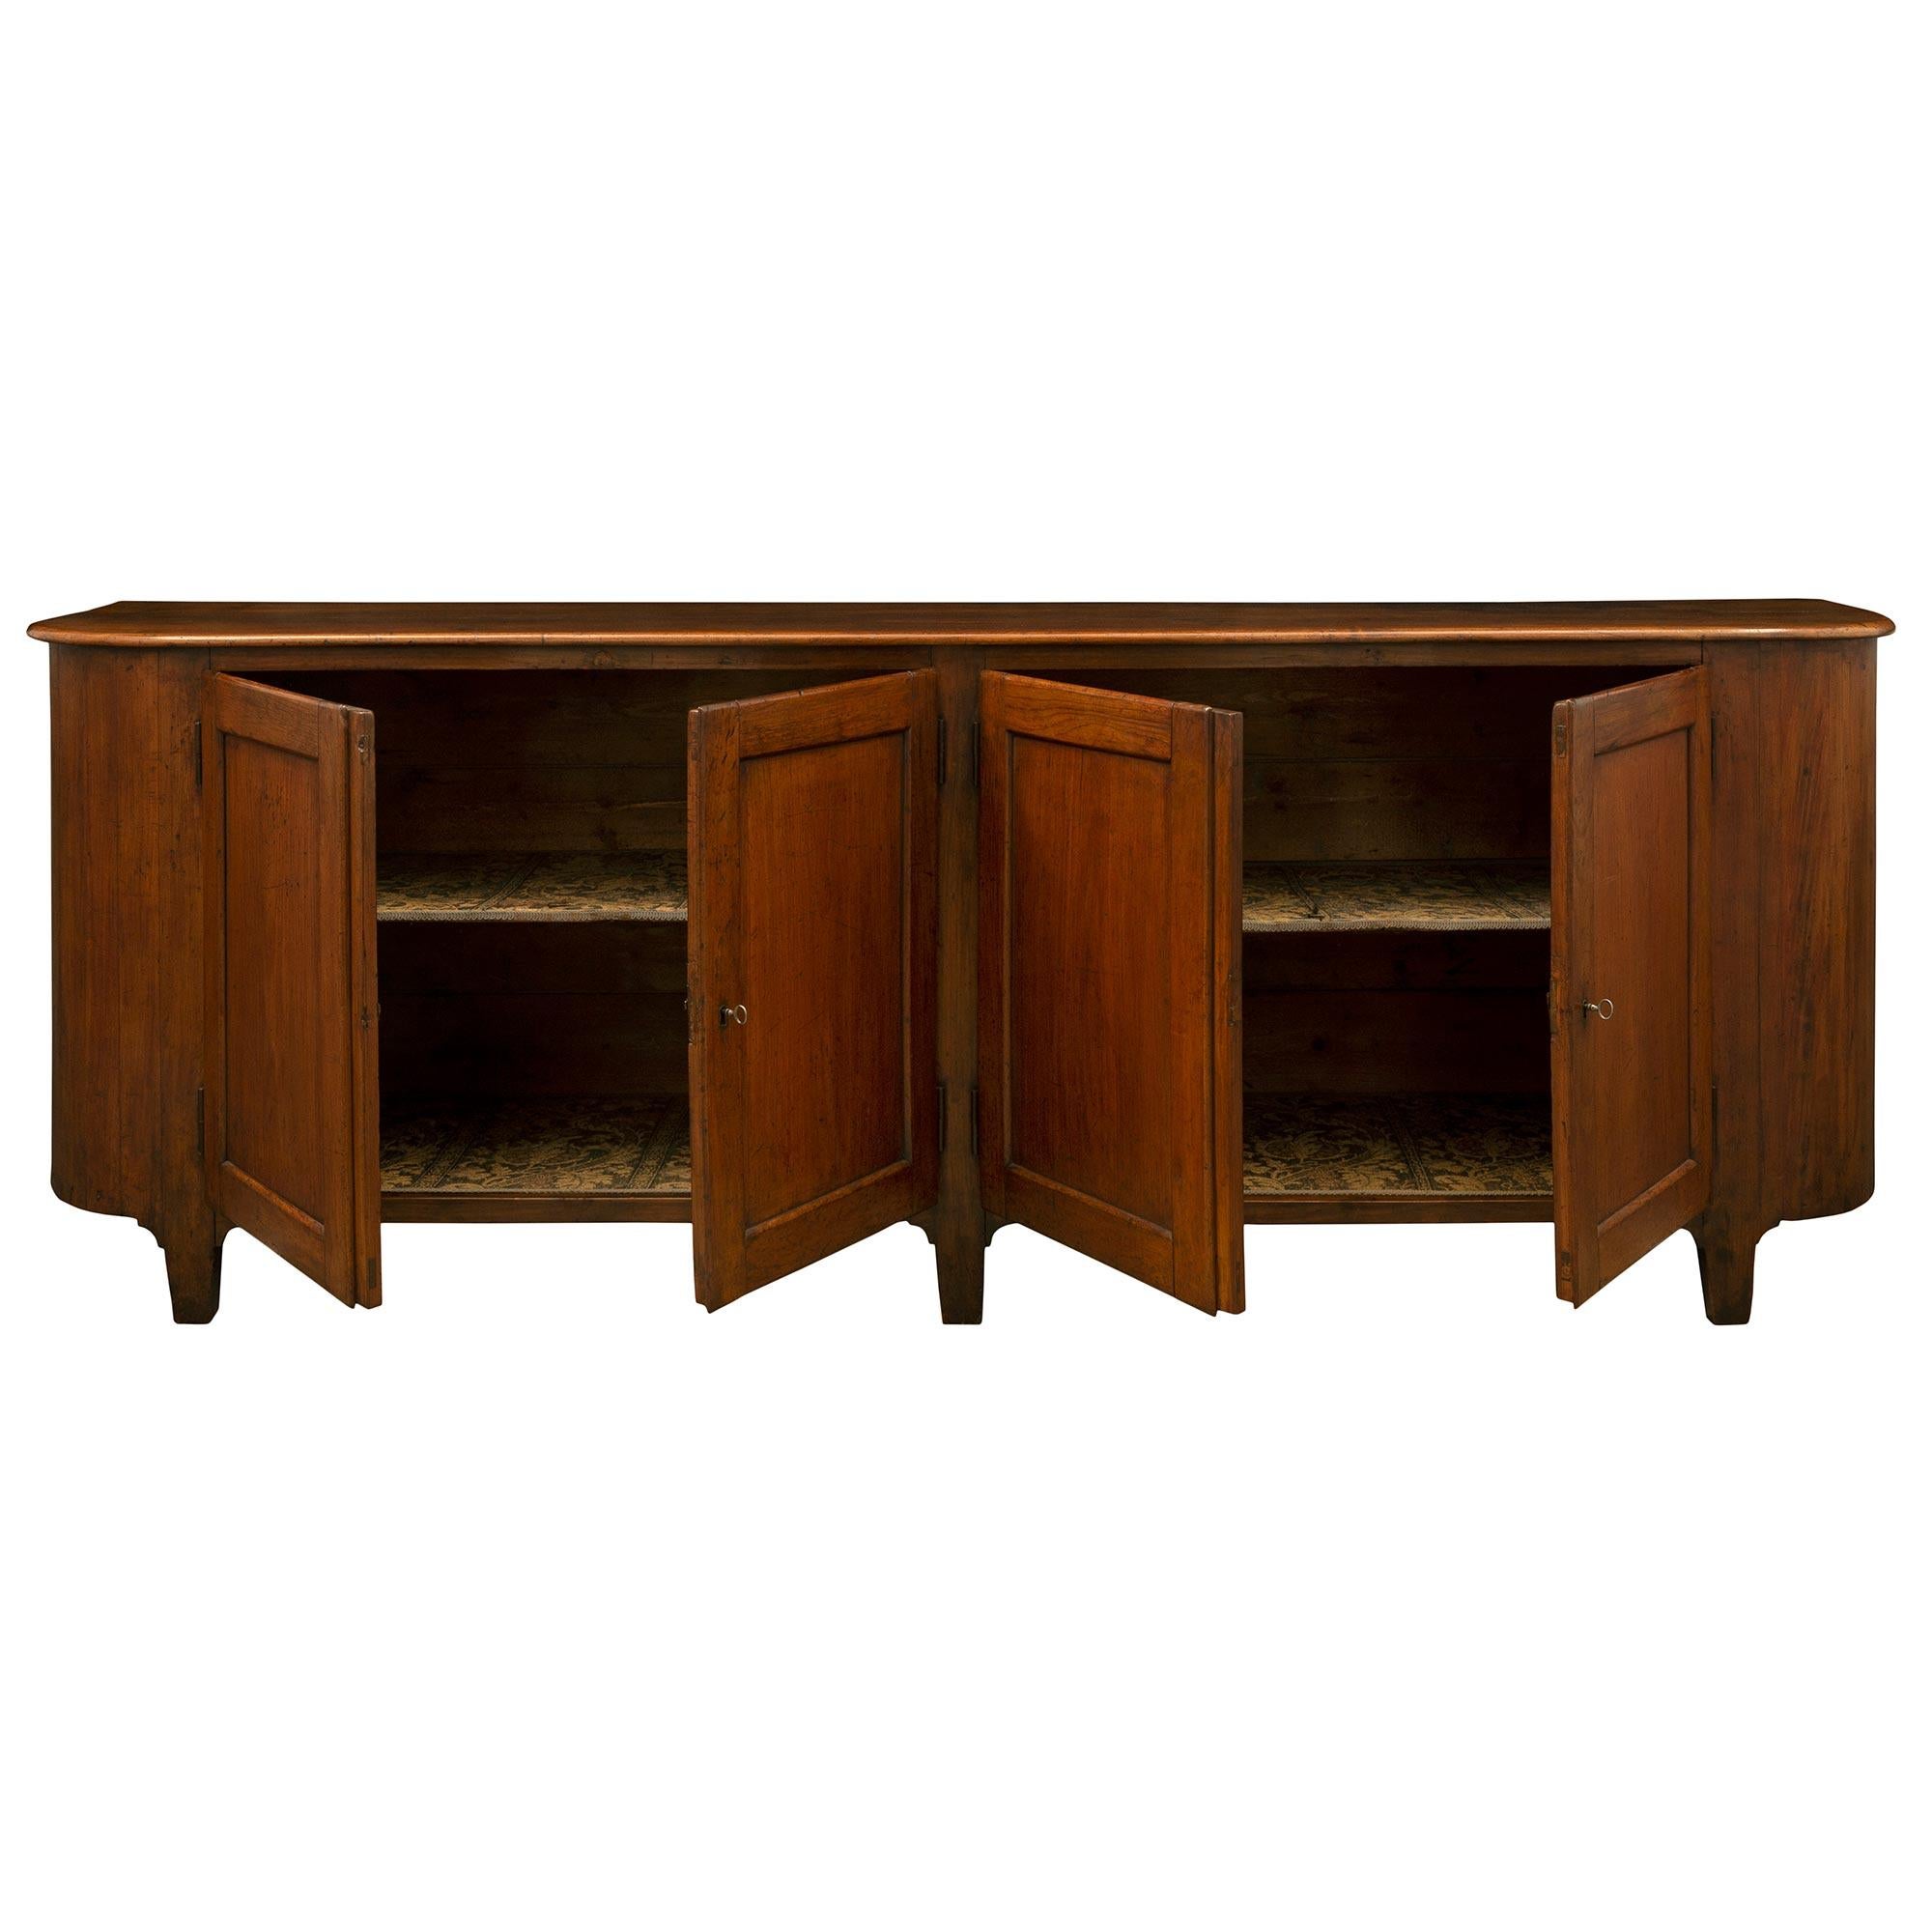 A handsome and very large scale Italian 18th century solid Walnut country buffet from Tuscany. The four door buffet is raised by five elegant rectangular tapered legs below the straight frieze and rounded sides. At the front are two pairs of doors